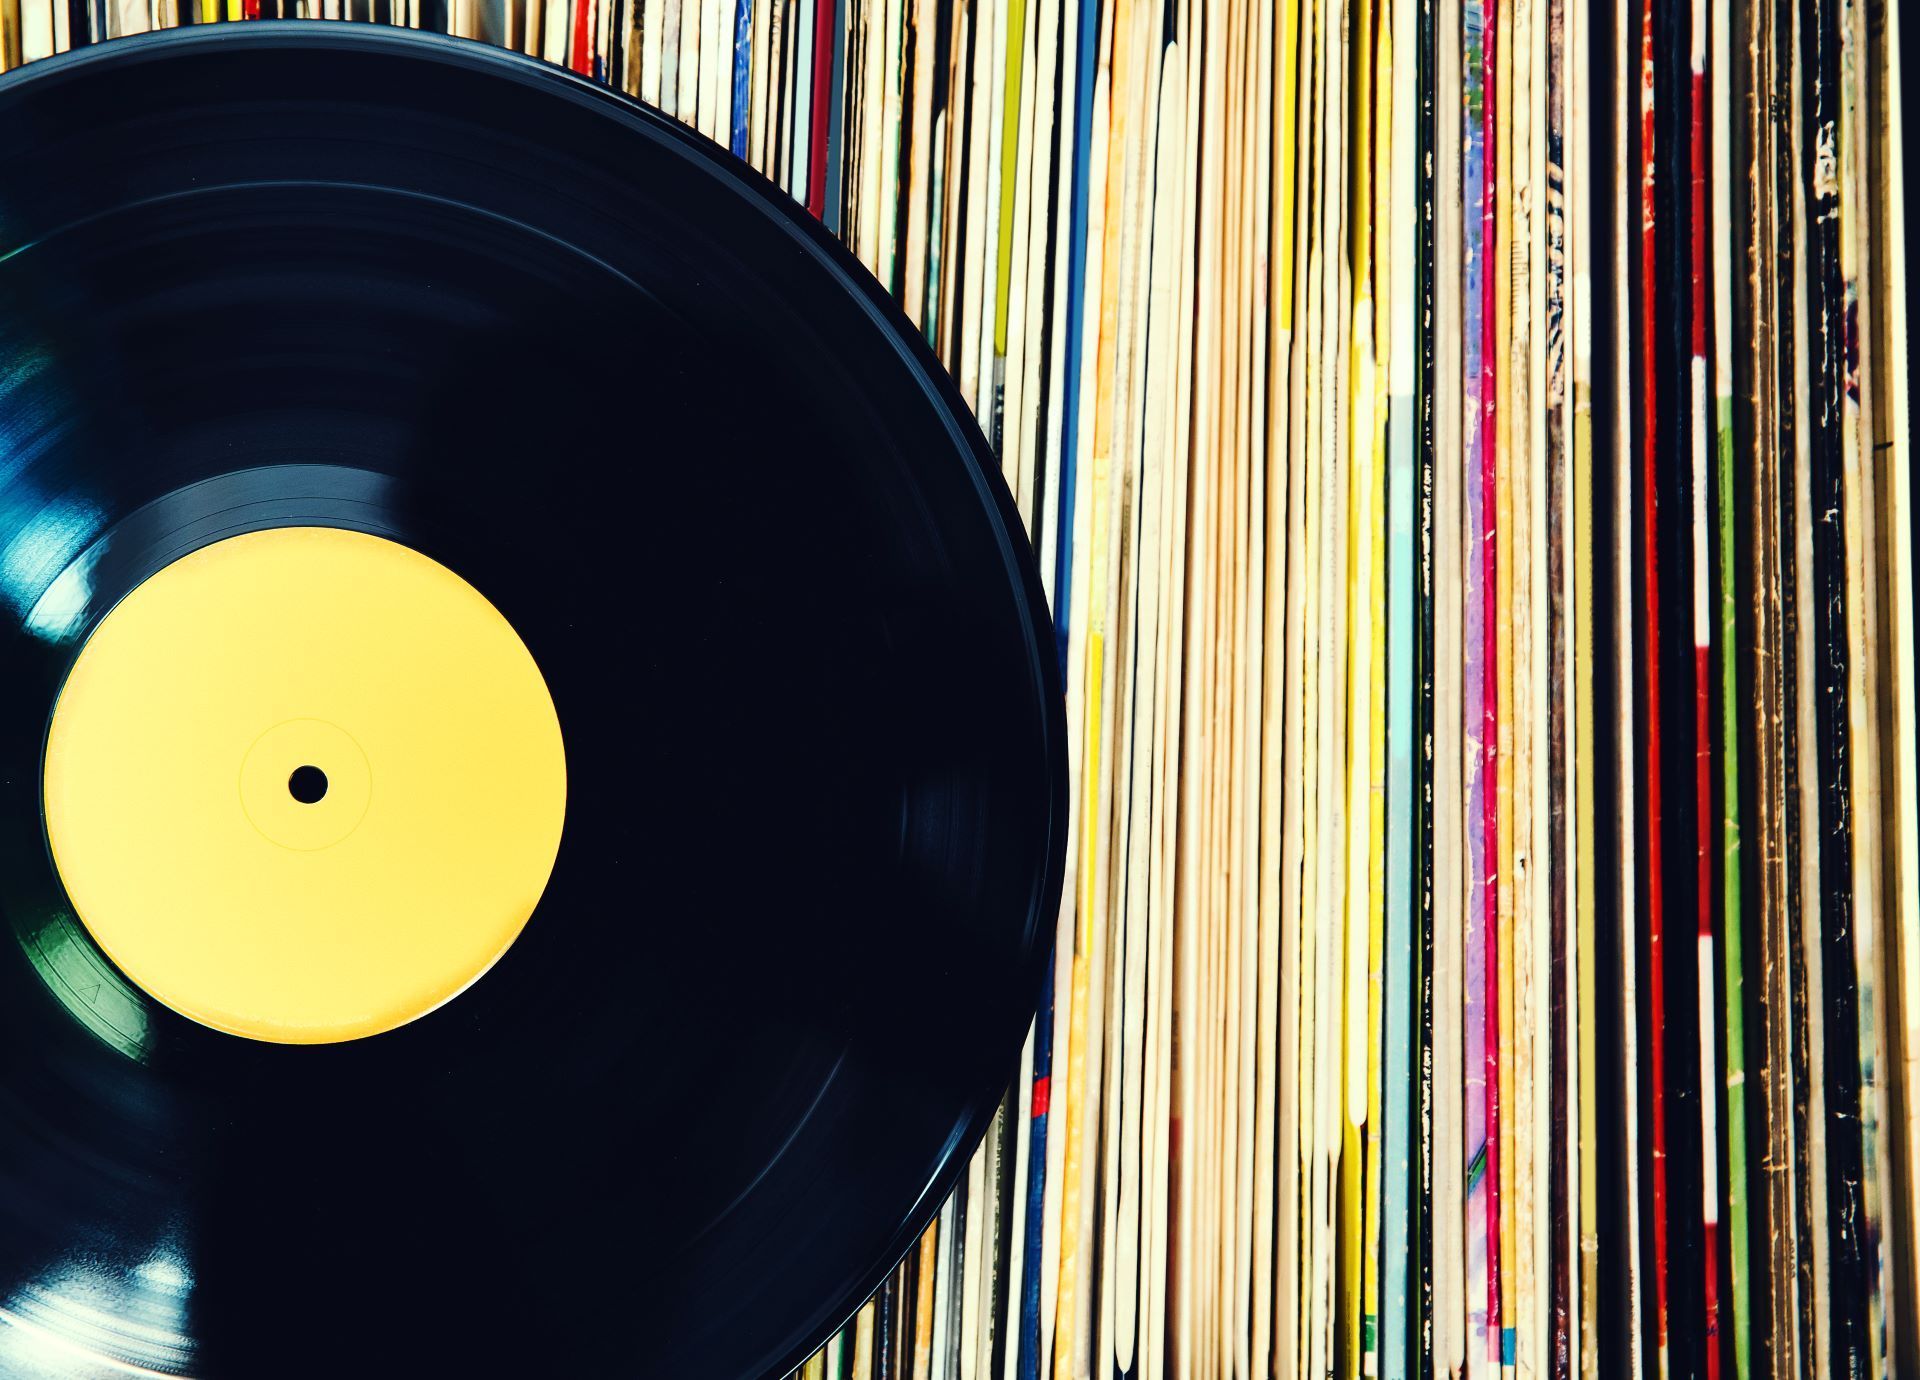 close up photo of a vinyl record leaning on a row of records still in sleeves